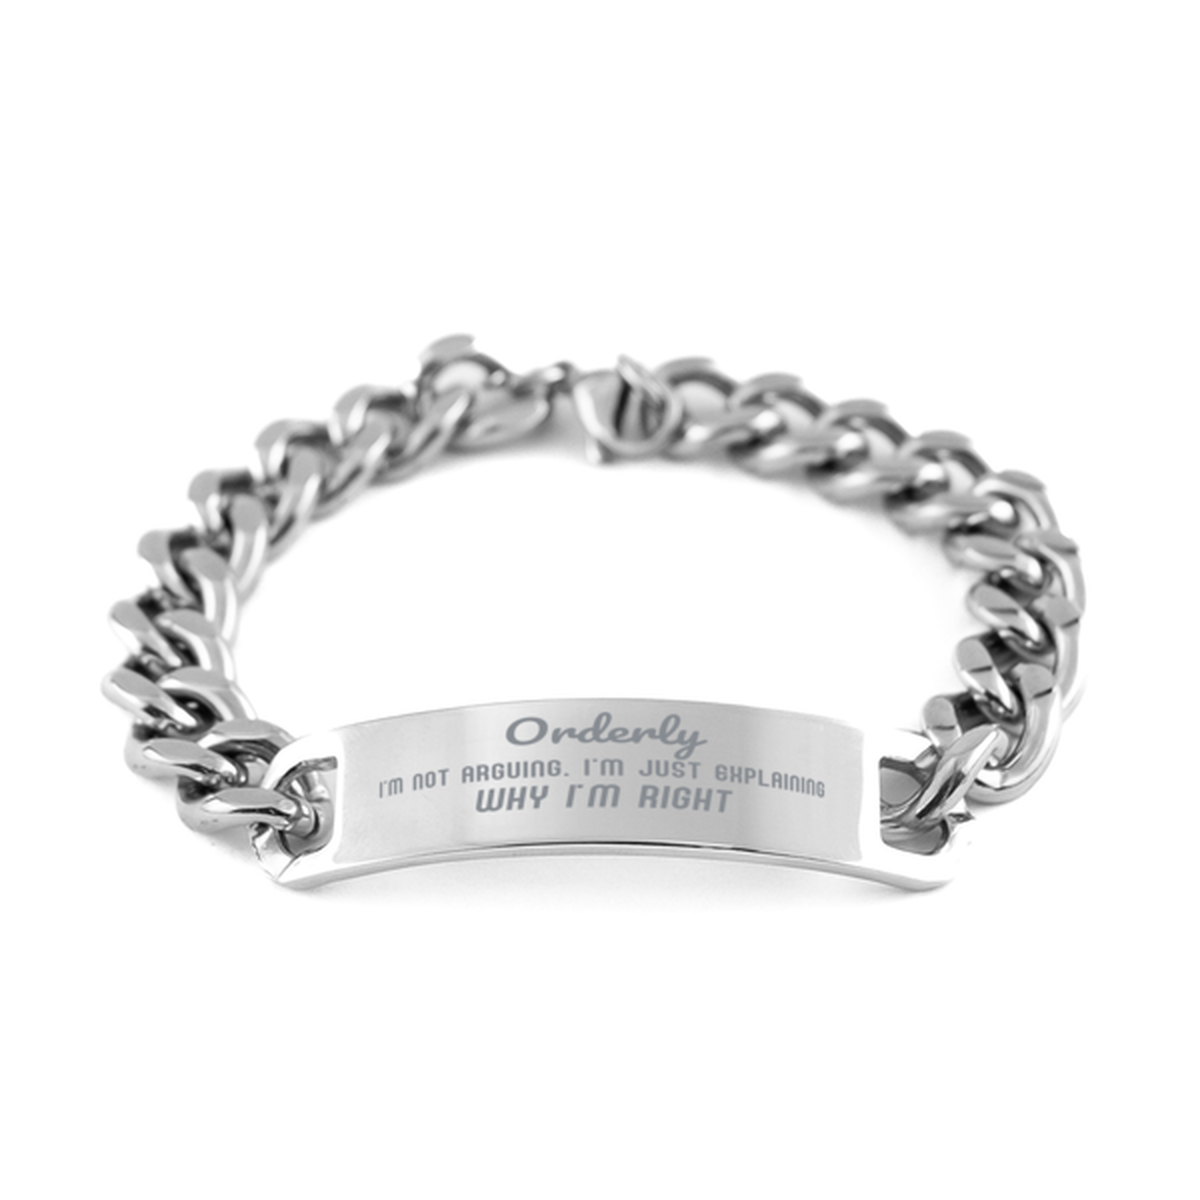 Orderly I'm not Arguing. I'm Just Explaining Why I'm RIGHT Cuban Chain Stainless Steel Bracelet, Graduation Birthday Christmas Orderly Gifts For Orderly Funny Saying Quote Present for Men Women Coworker